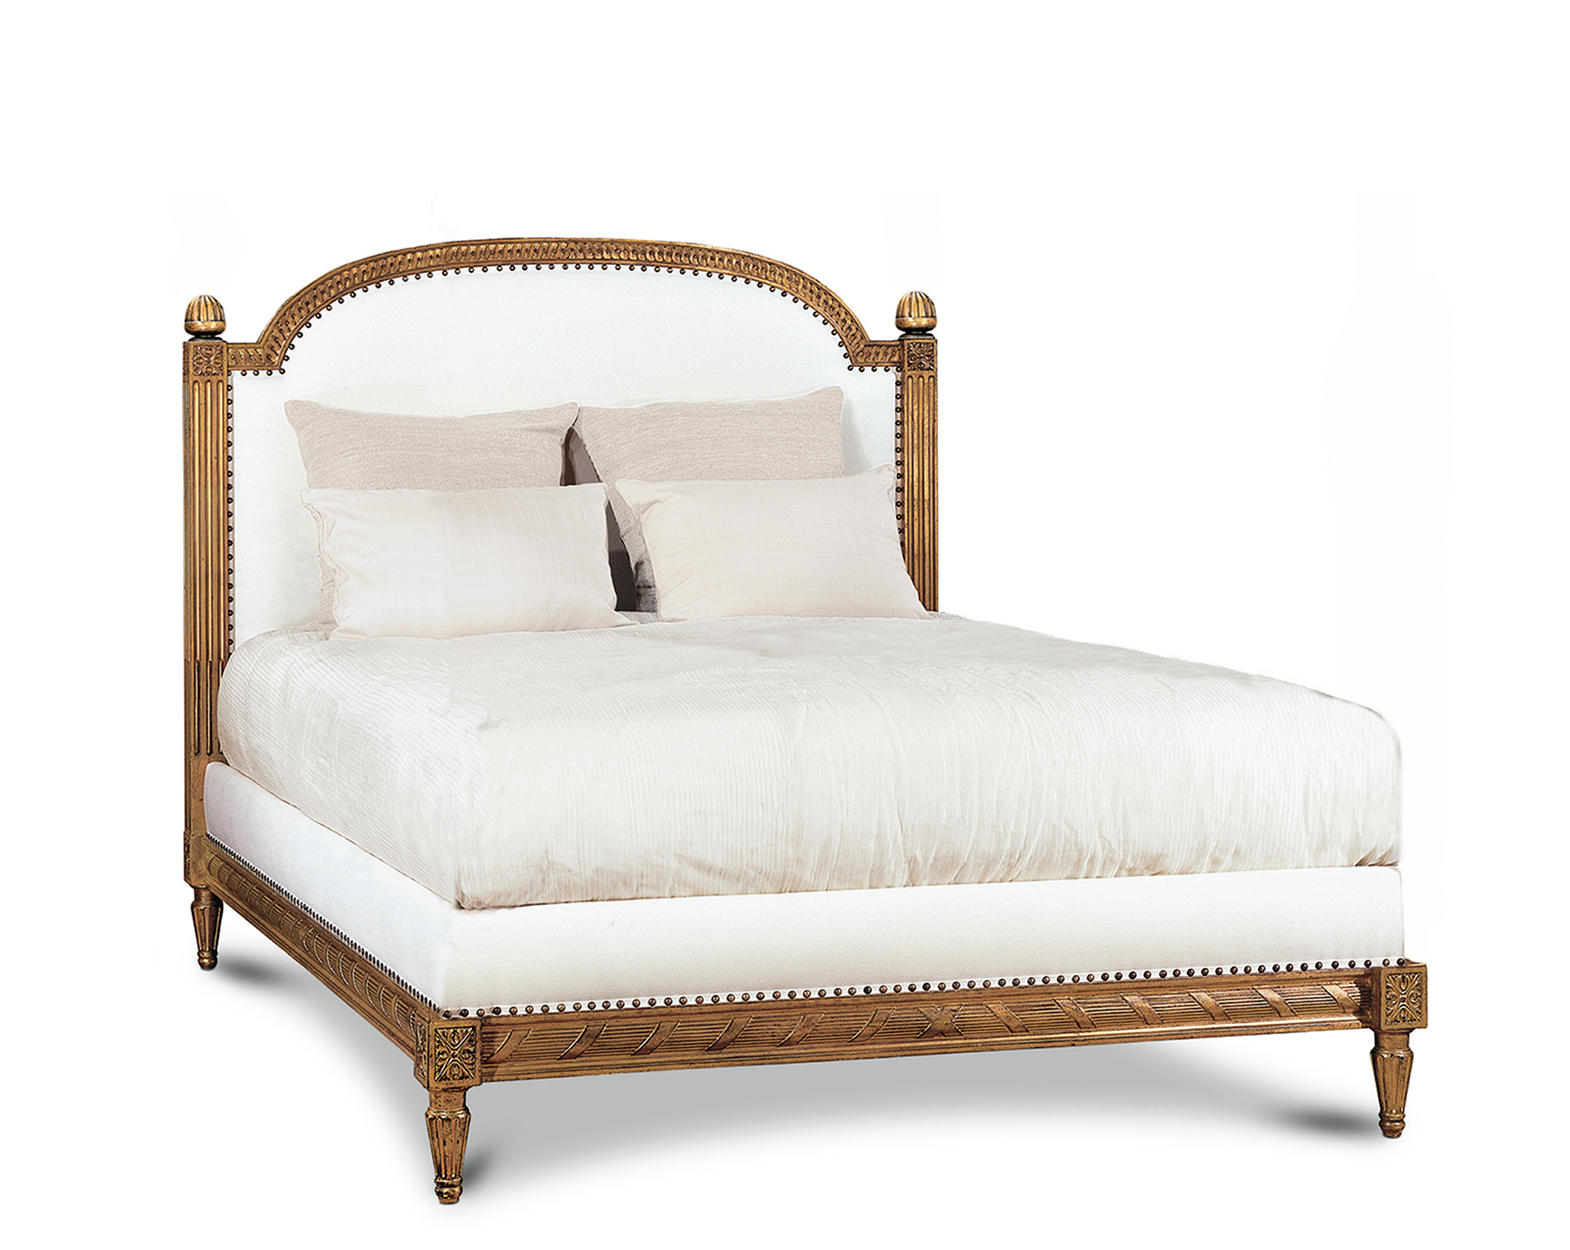 LOUIS XVI BED WITHOUT FOOTBOARD QUEEN